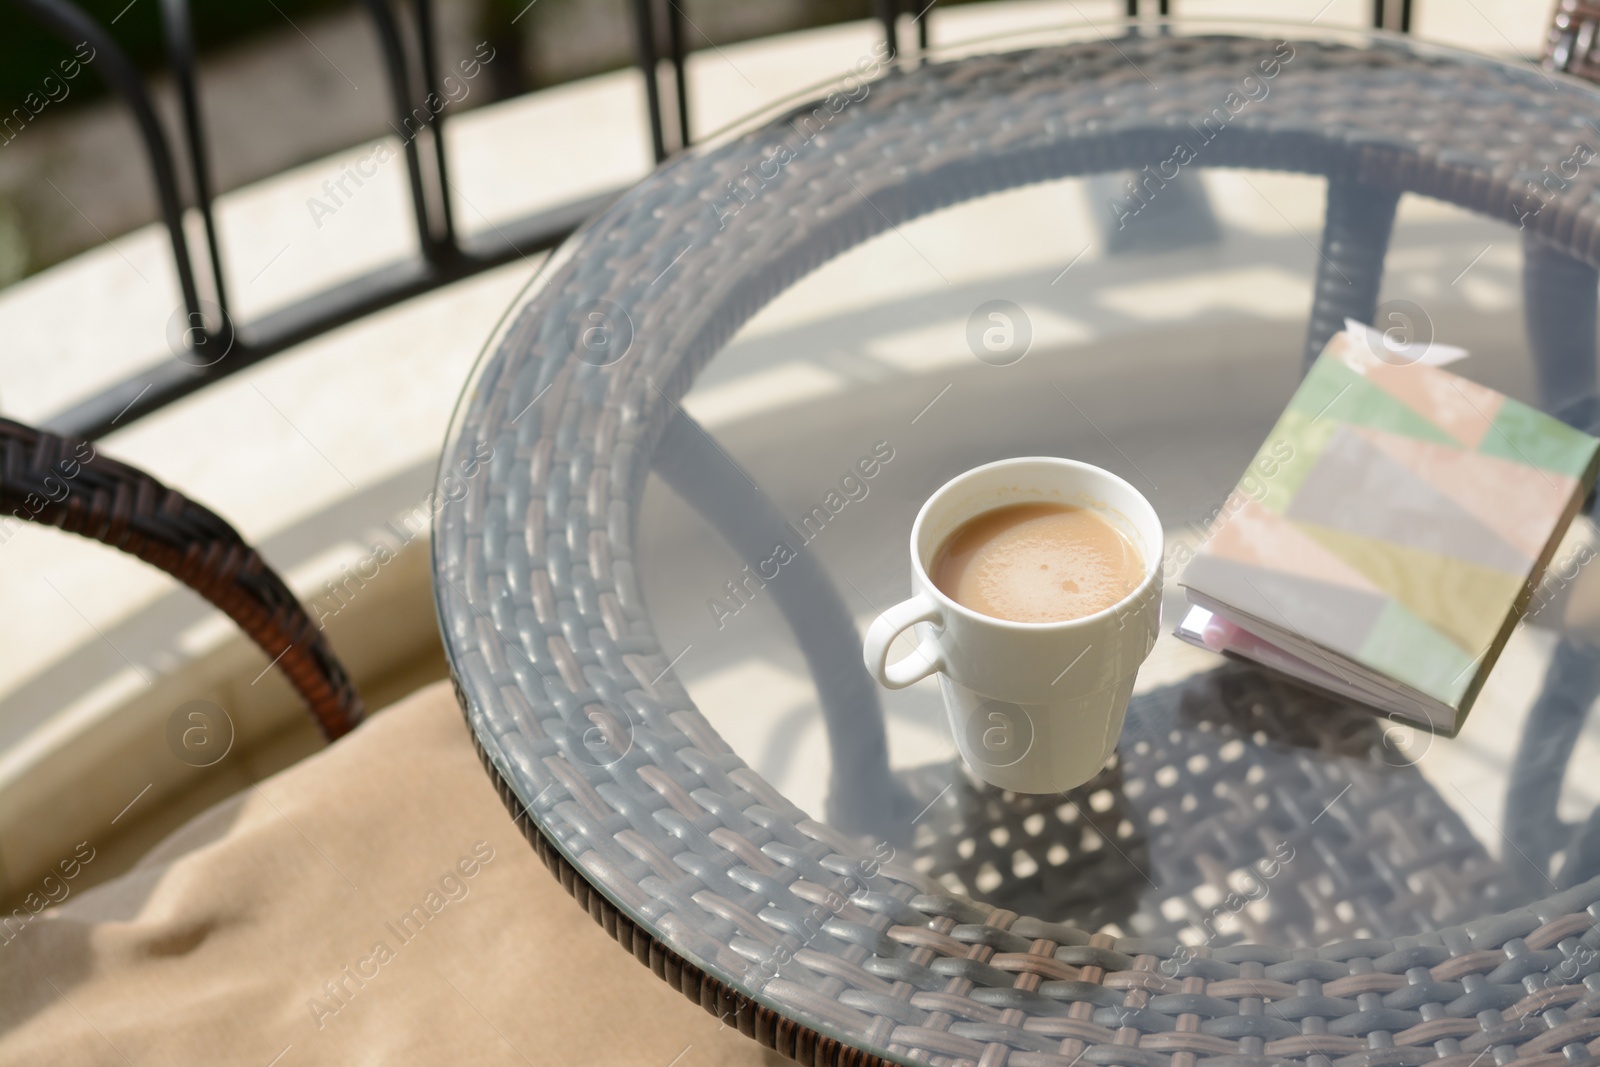 Photo of Ceramic cup of drink and notebook with pen on glass table outdoors. Good morning